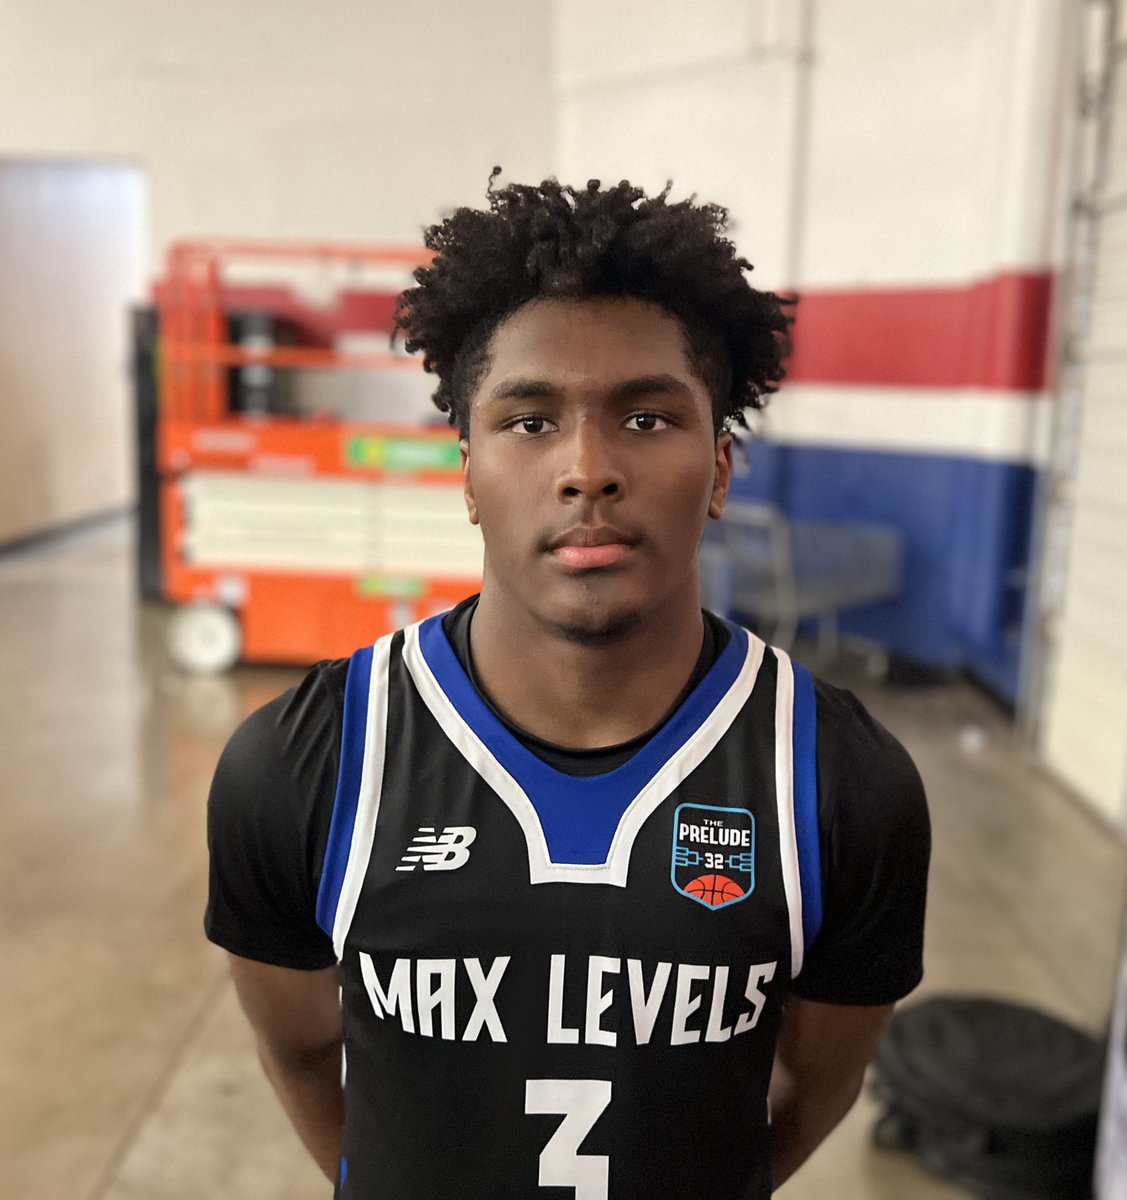 Someone that’ll see an uptick on his recruitment will be Jayden Ramnanan. Strong built guard that can score in bunches but J liked his blend of finding his way into the paint. With power and quickness. @Prelude_league